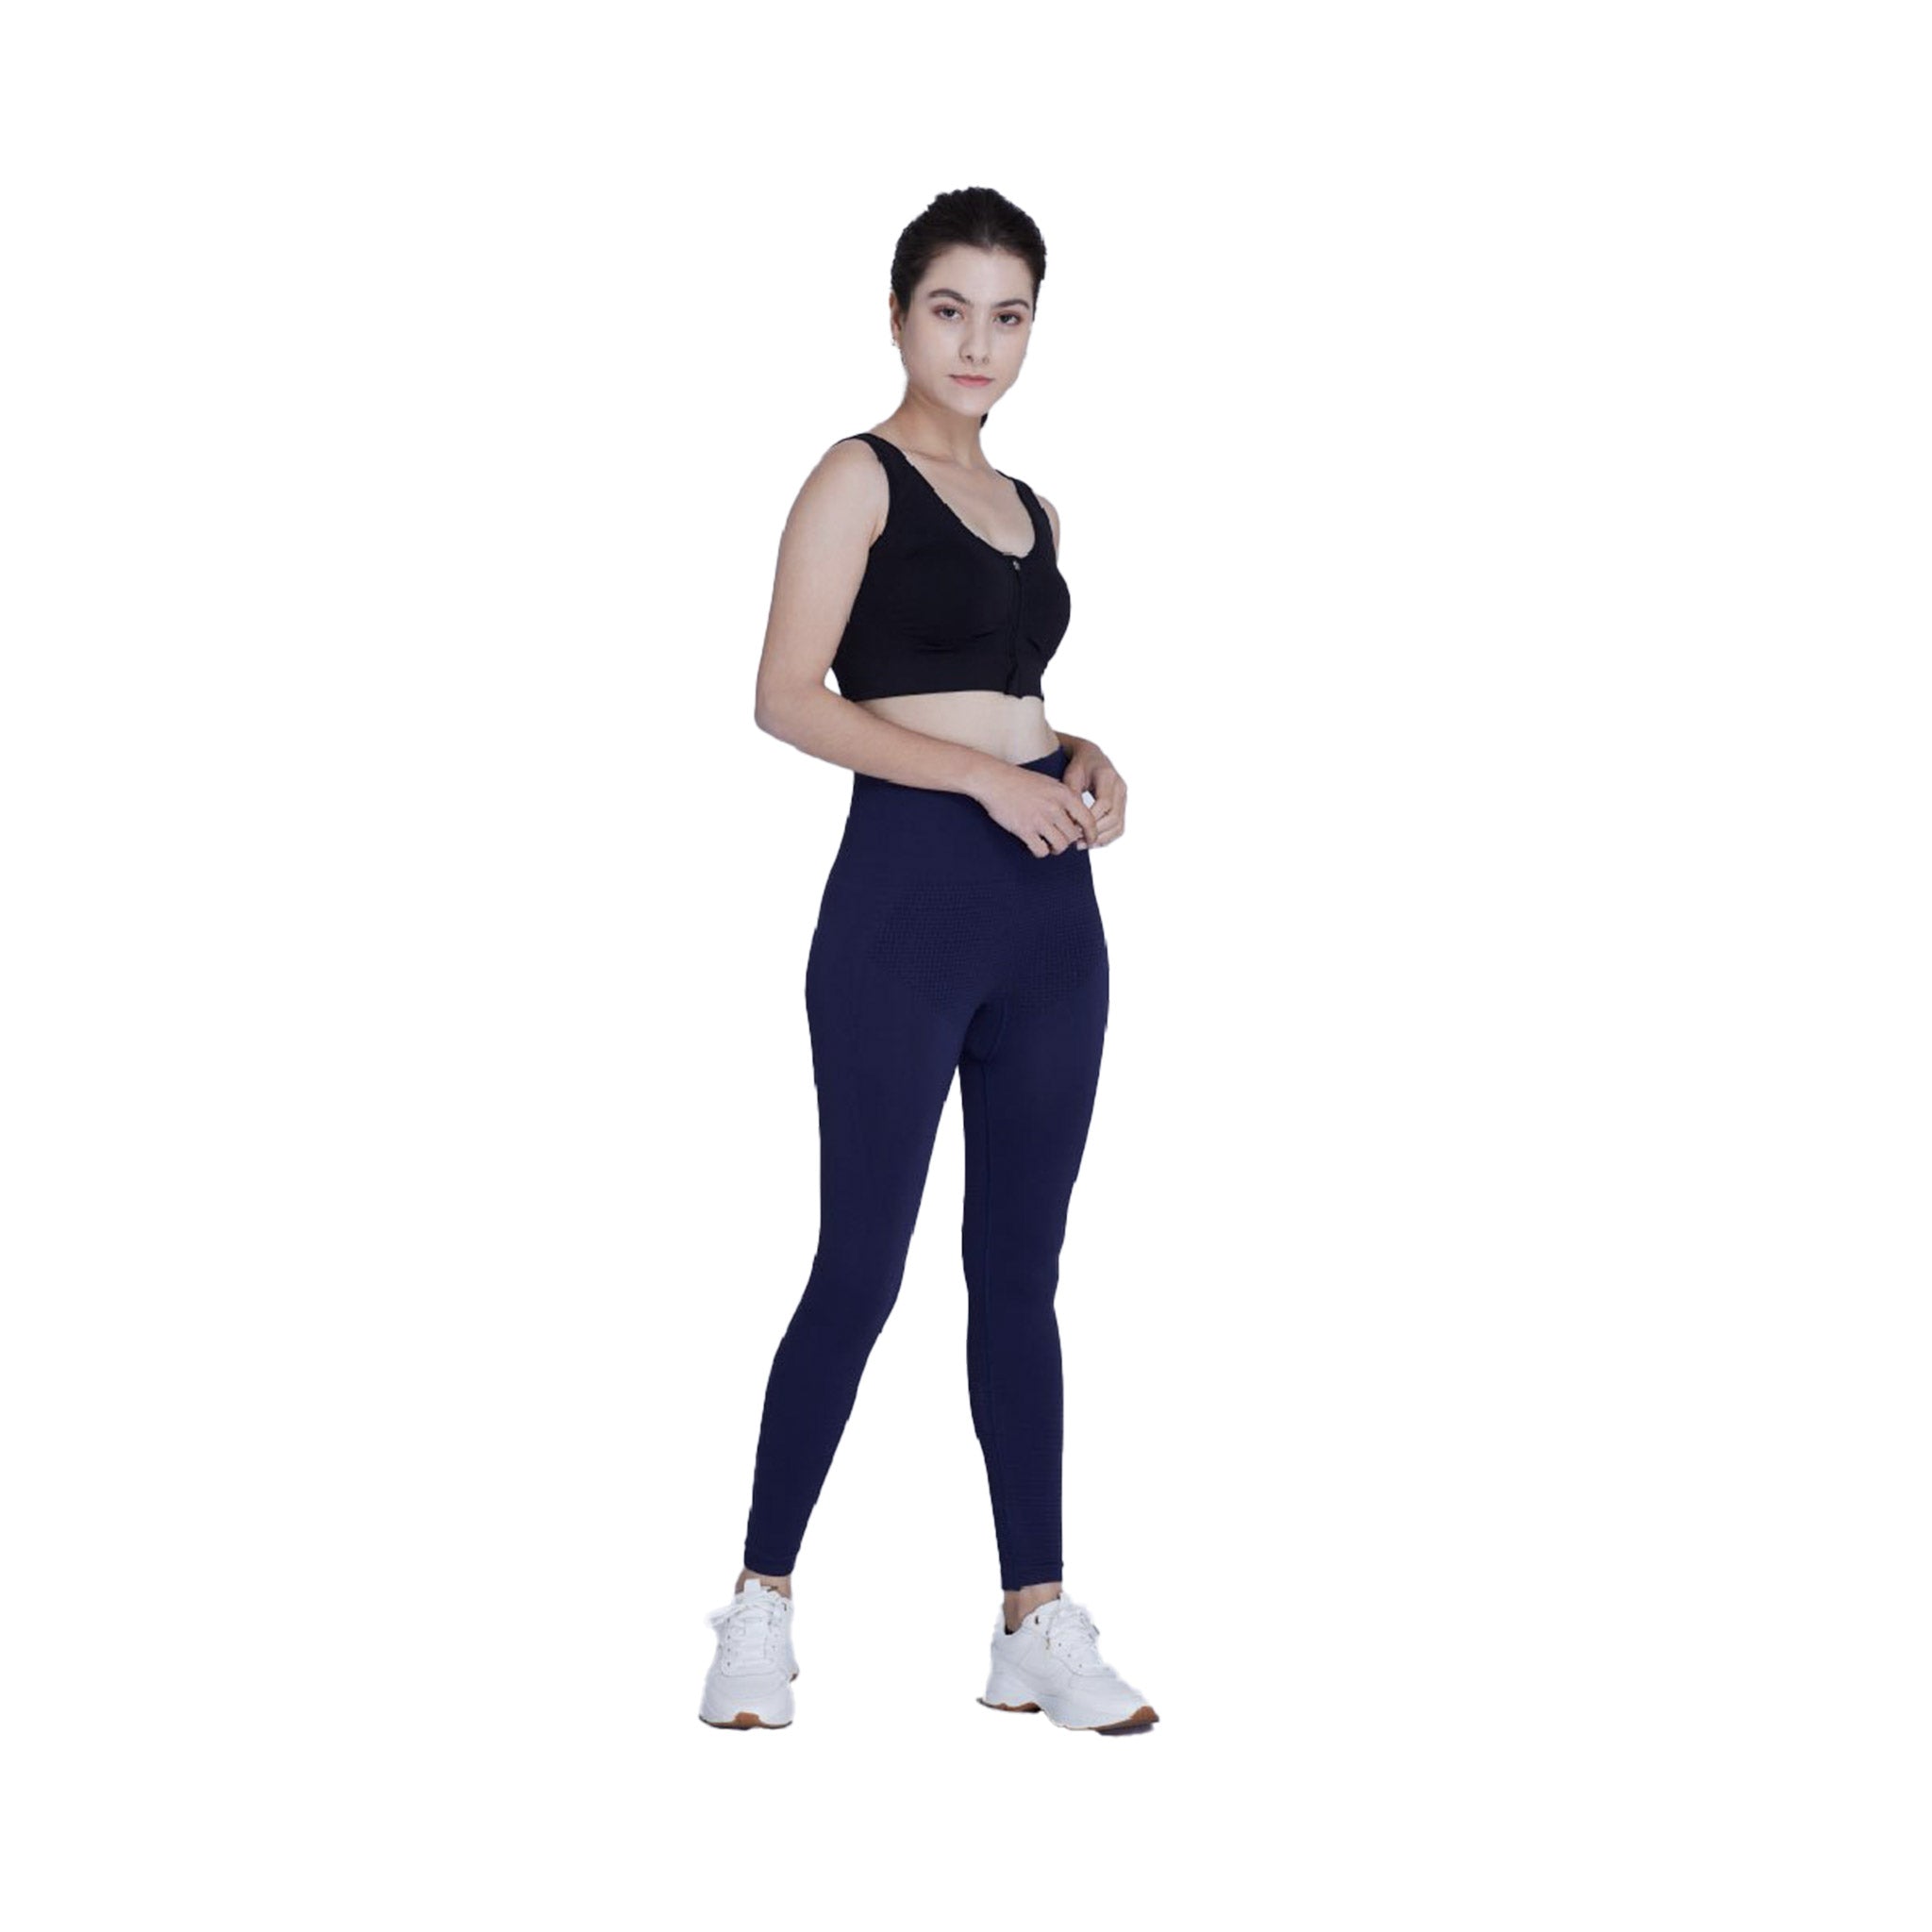 PP Graphene Tights - Navy Blue (Limited Edition)